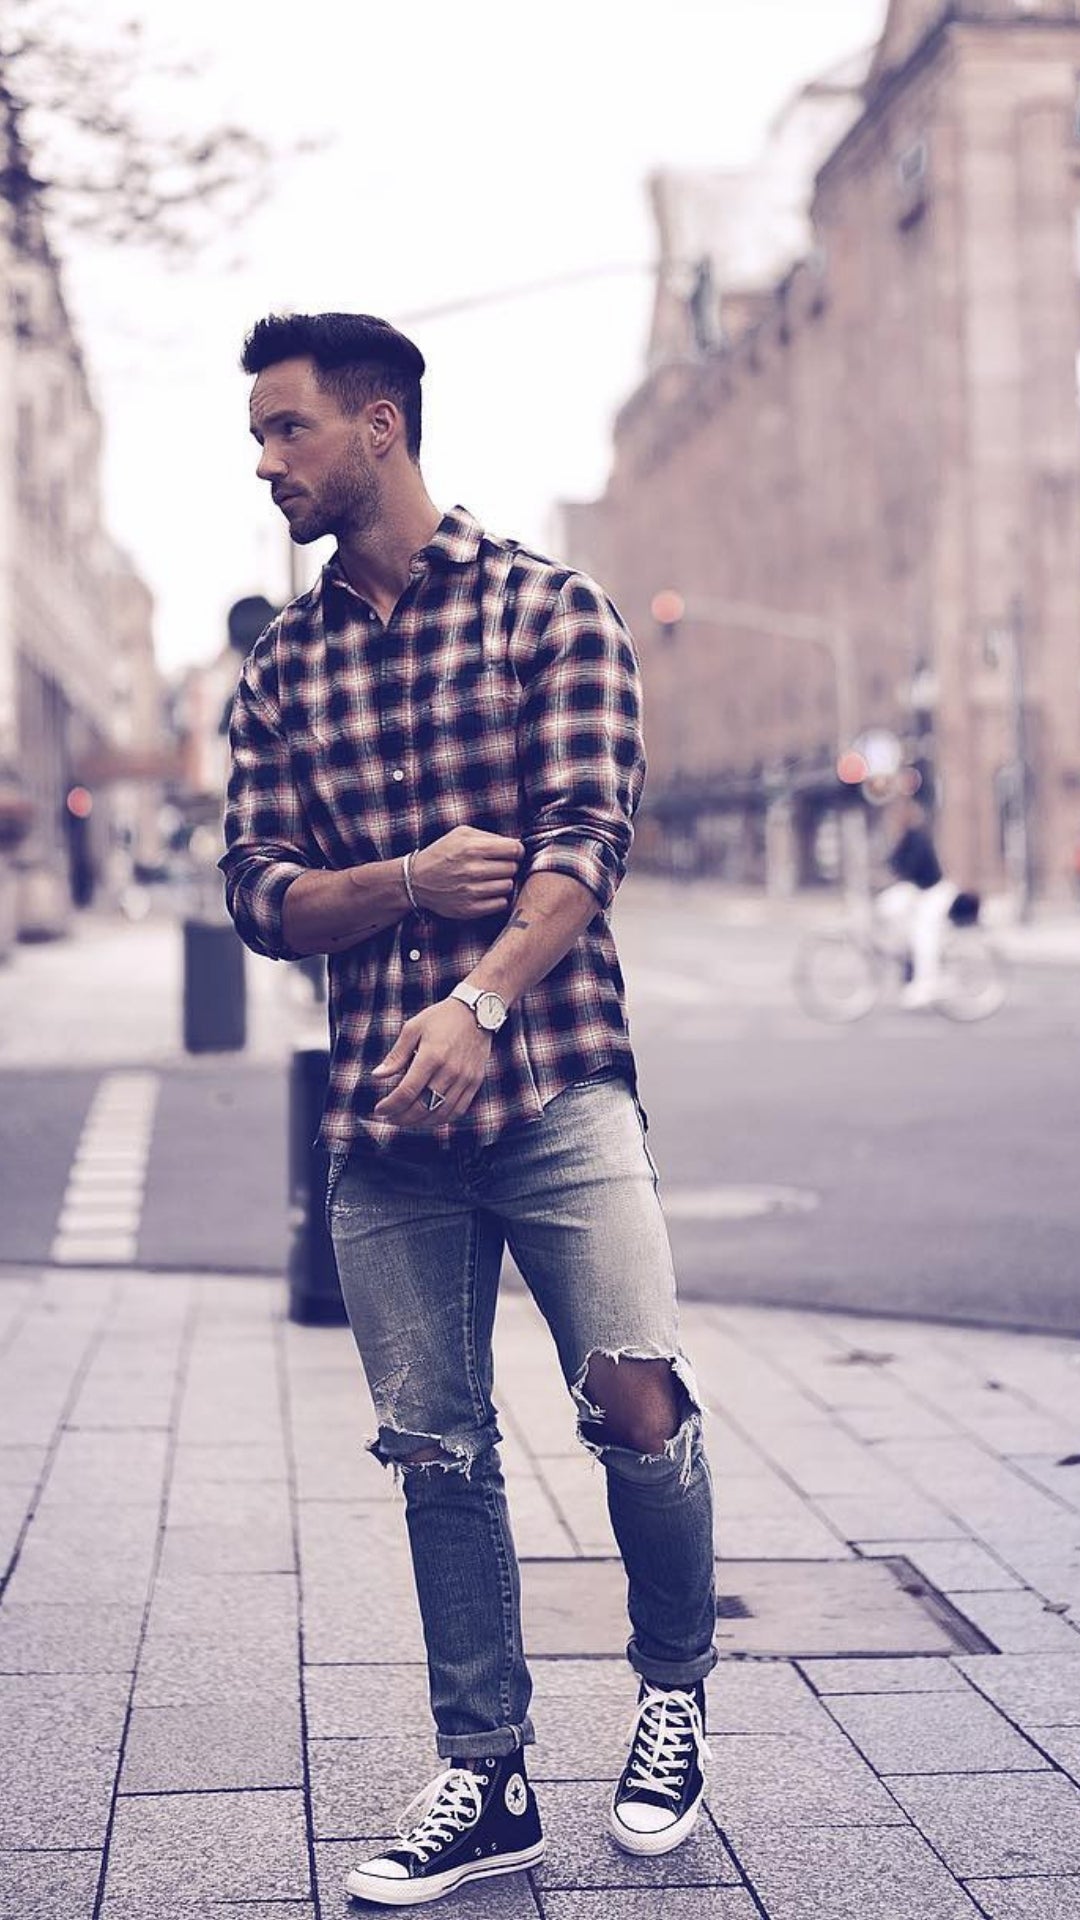 5 Coolest Check Shirt Outfits For Men #check #shirt #outfits # ...